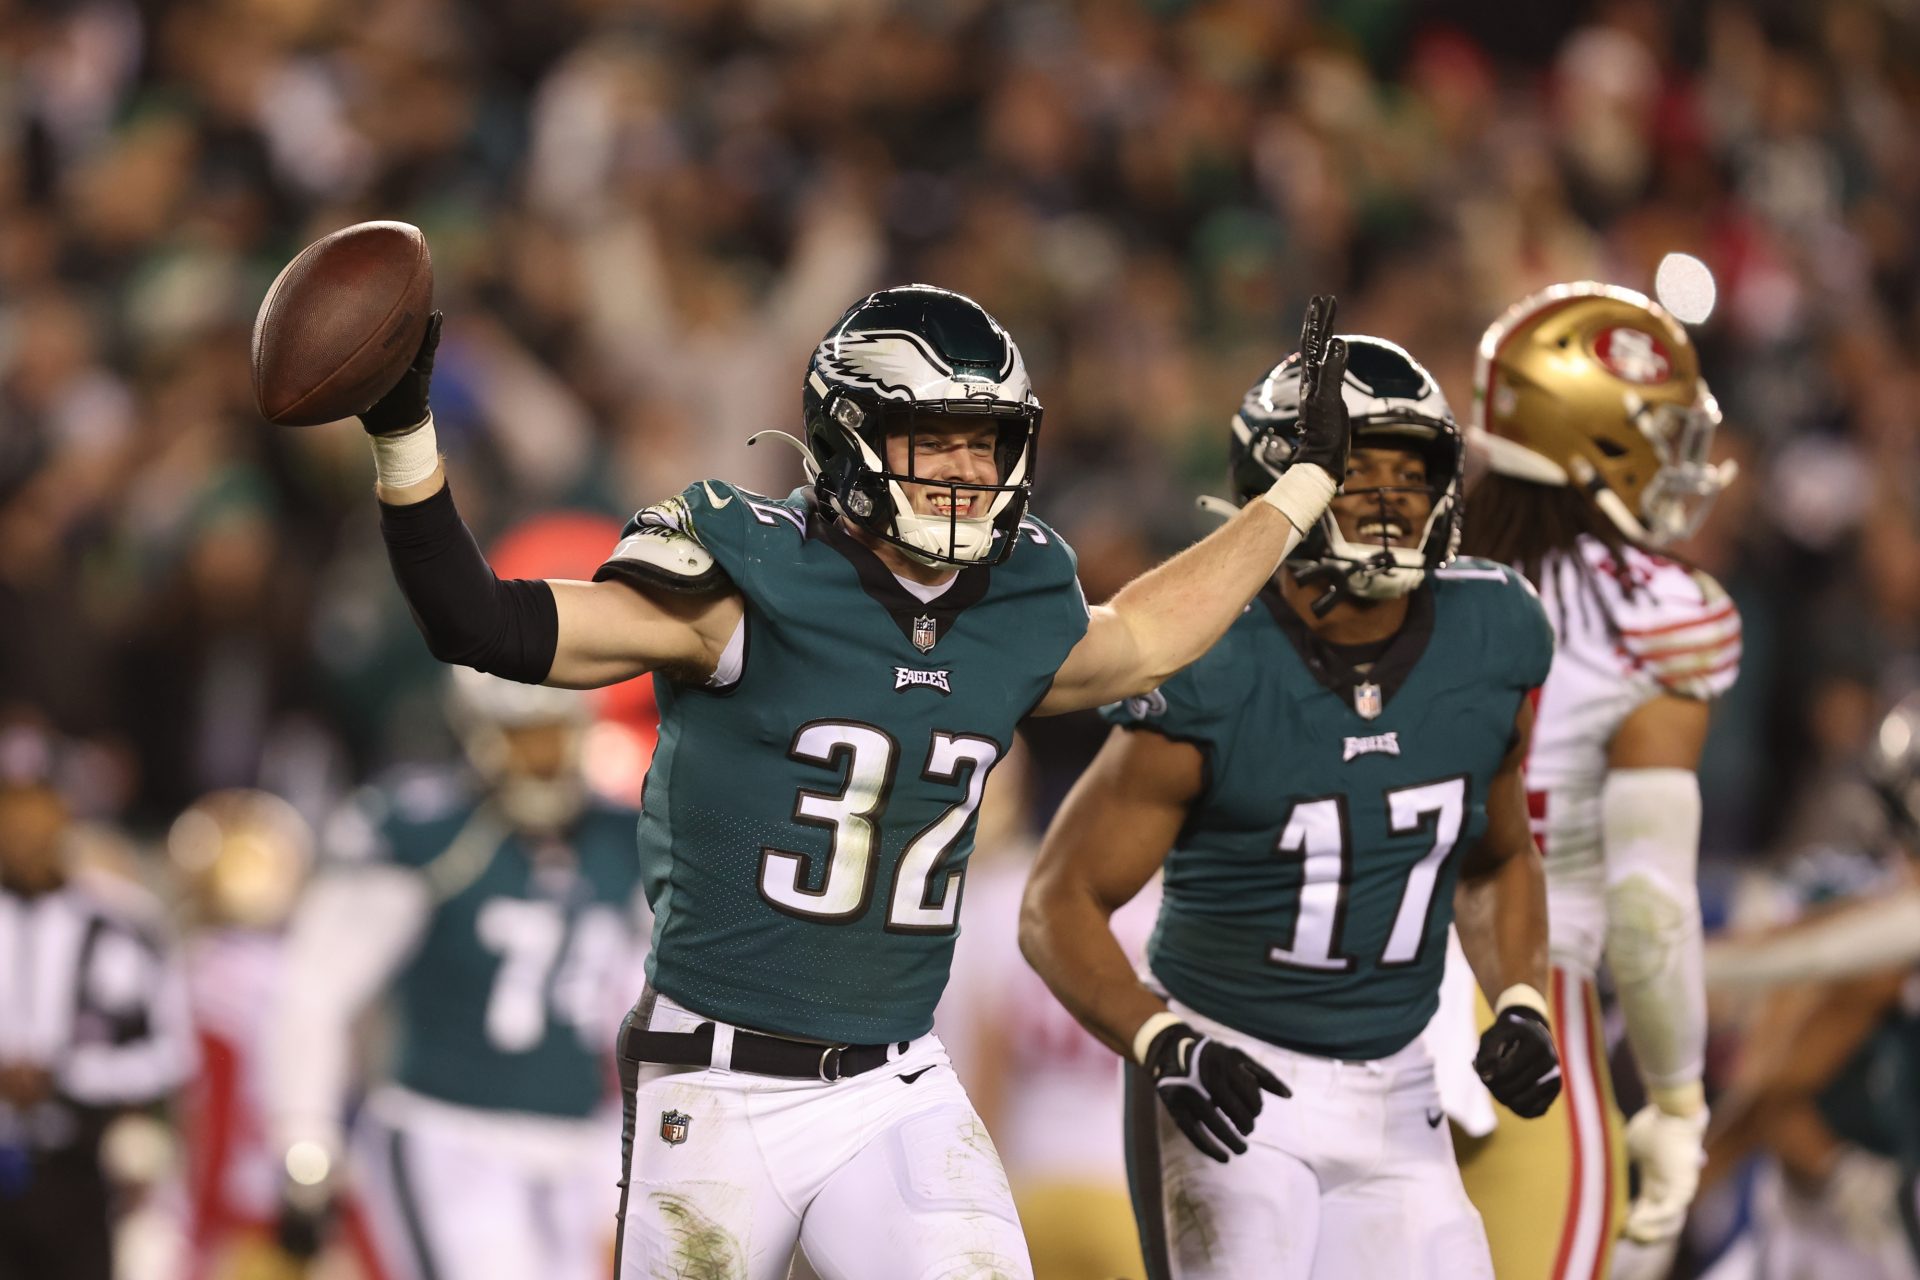 The Eagles snatched up the ball